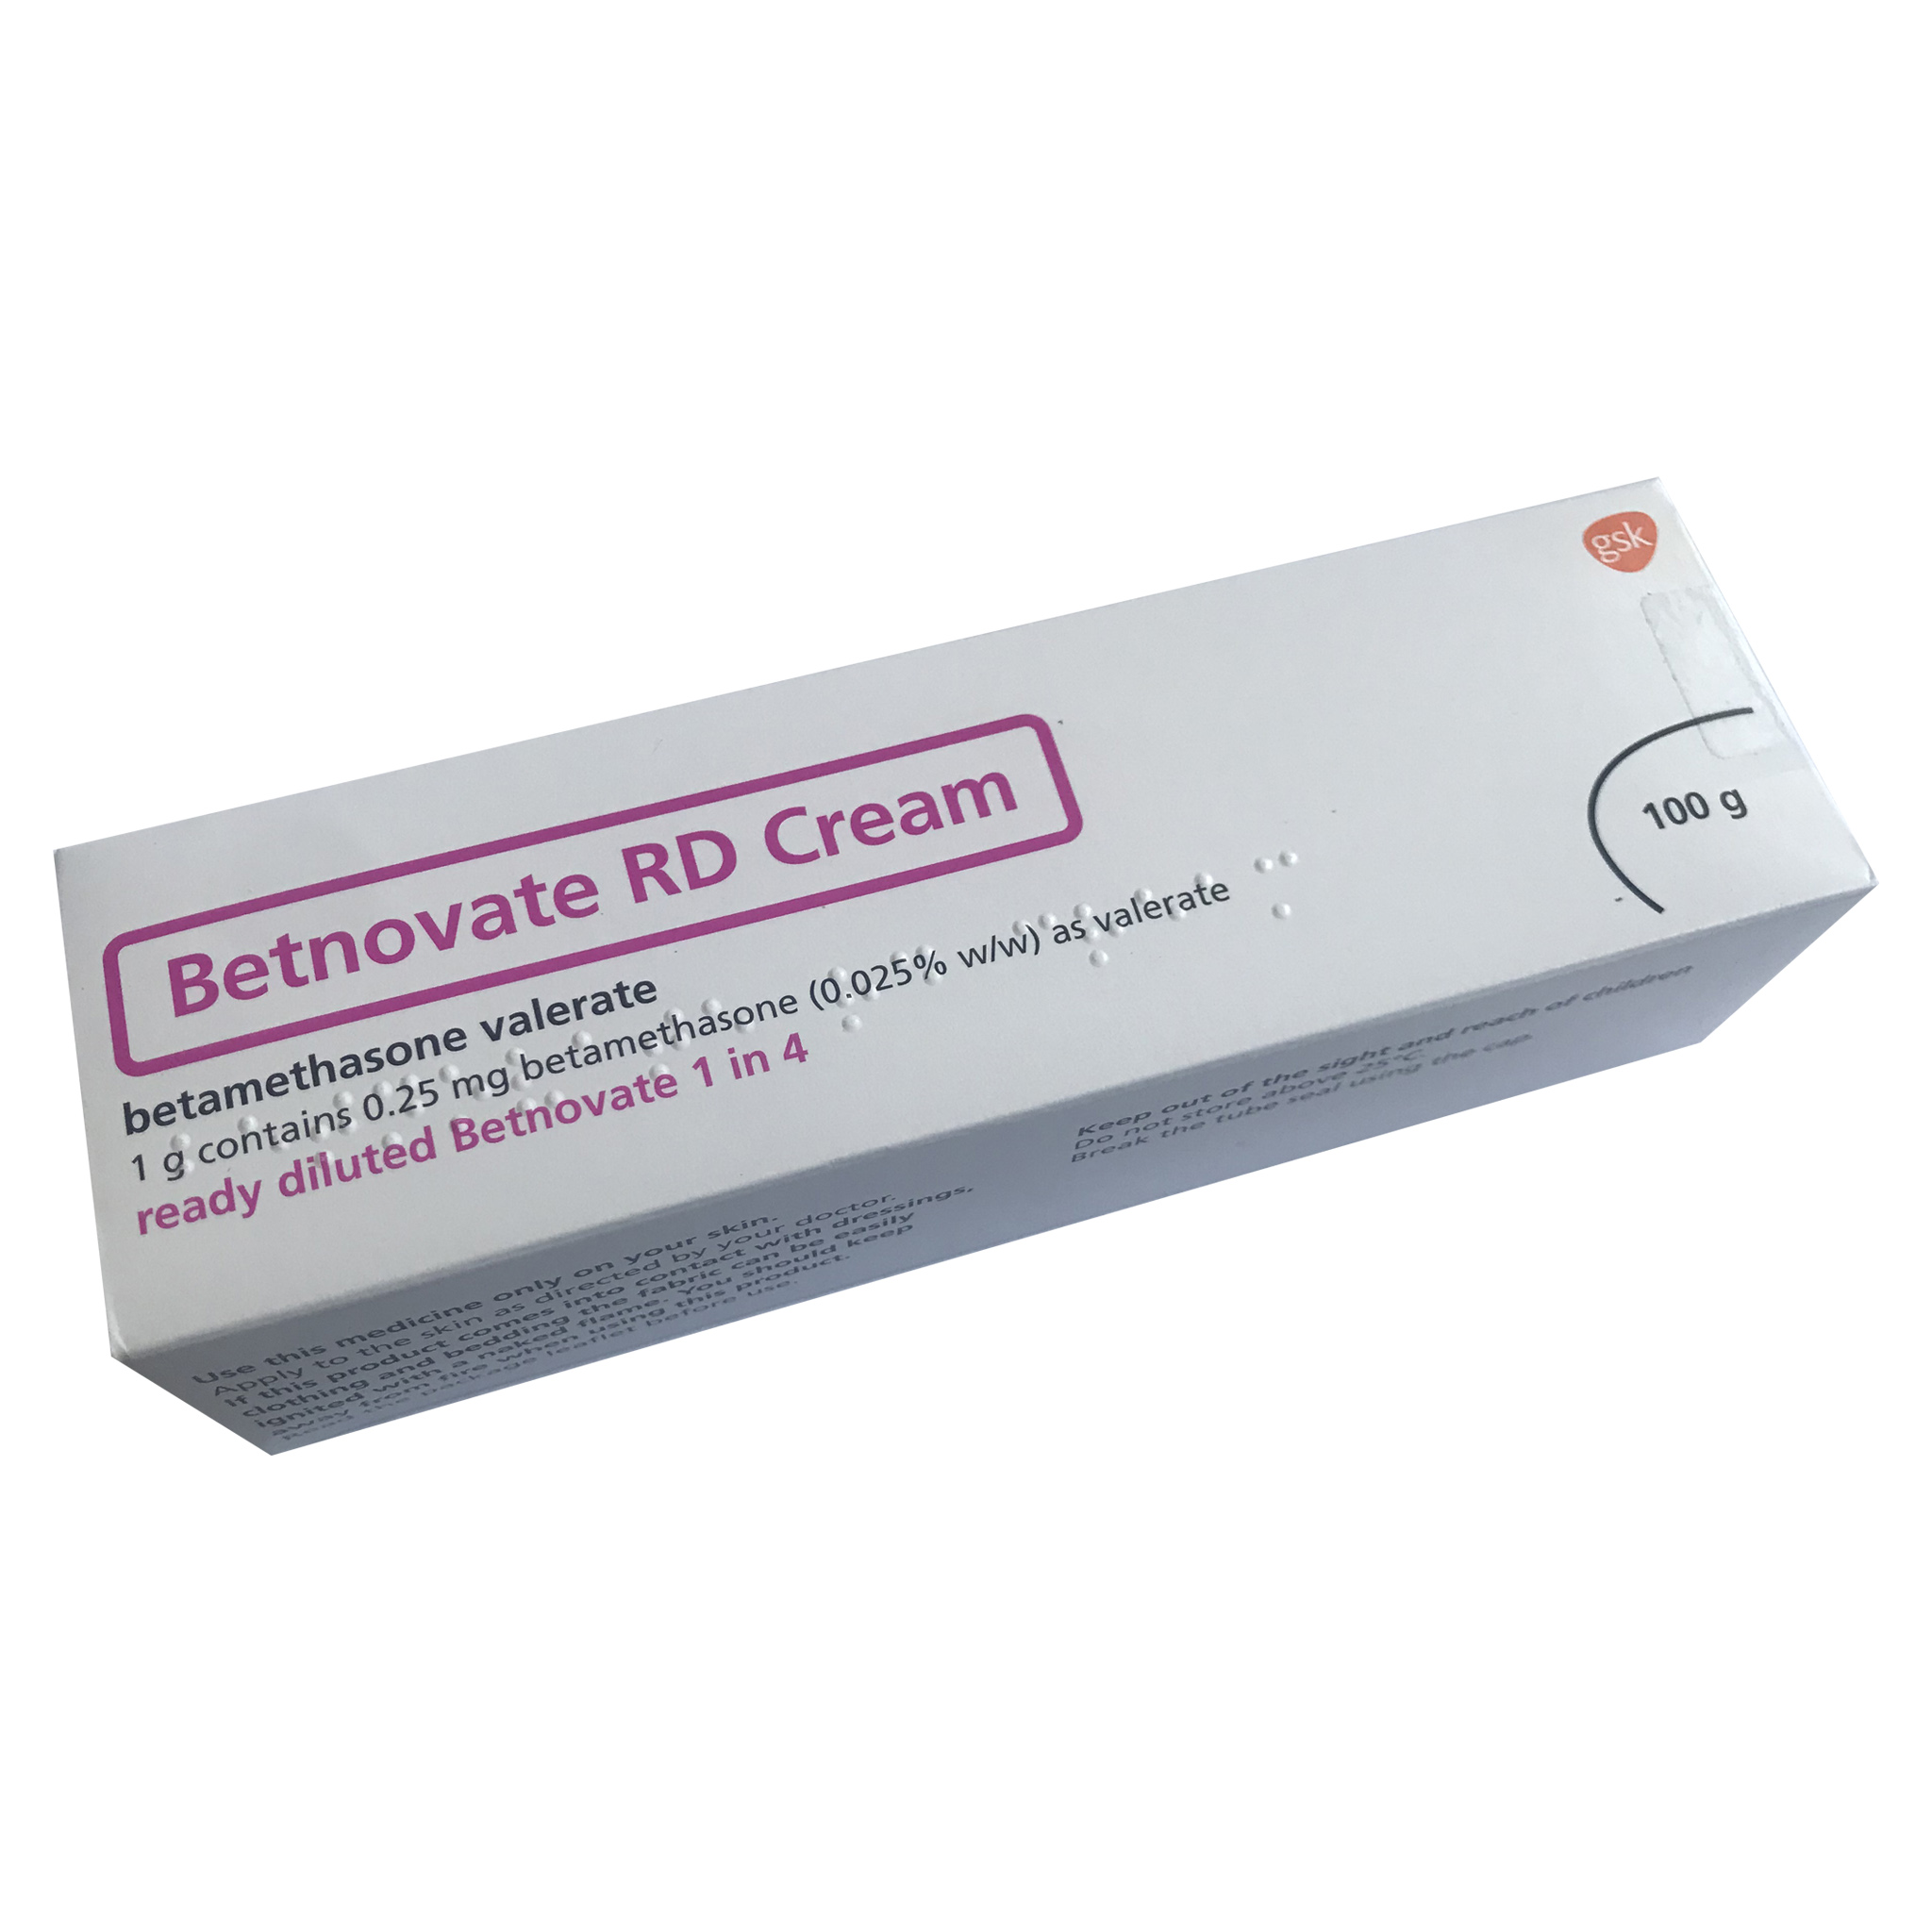 Betnovate RD 0.025% Cream/Ointment - Ointment, 100g